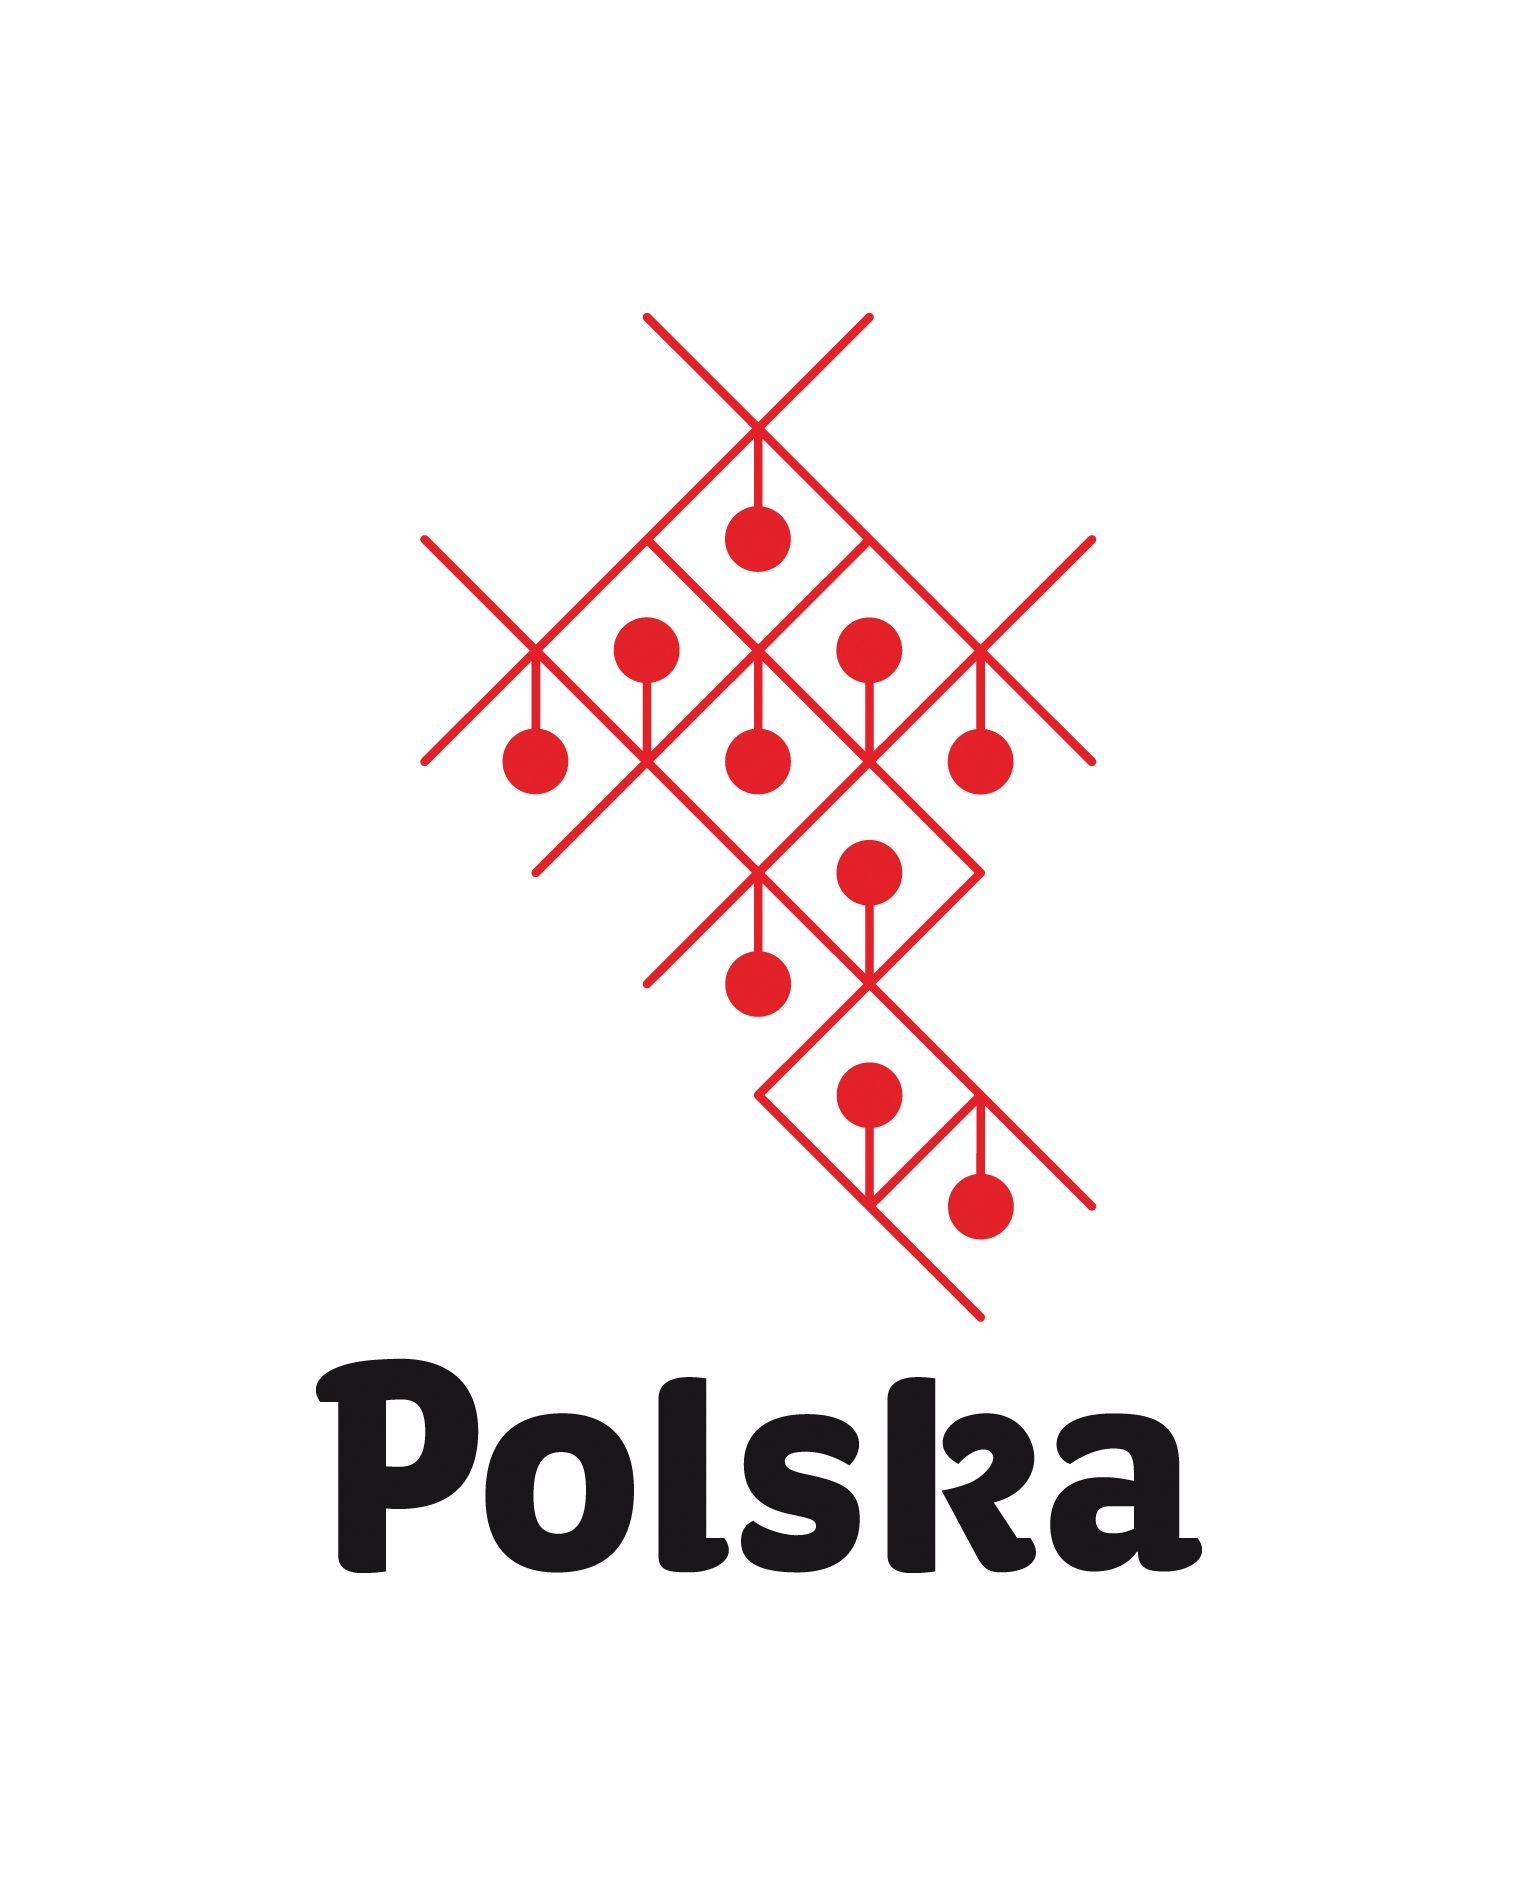 POLISH INVESTMENT AND TRADE AGENCY